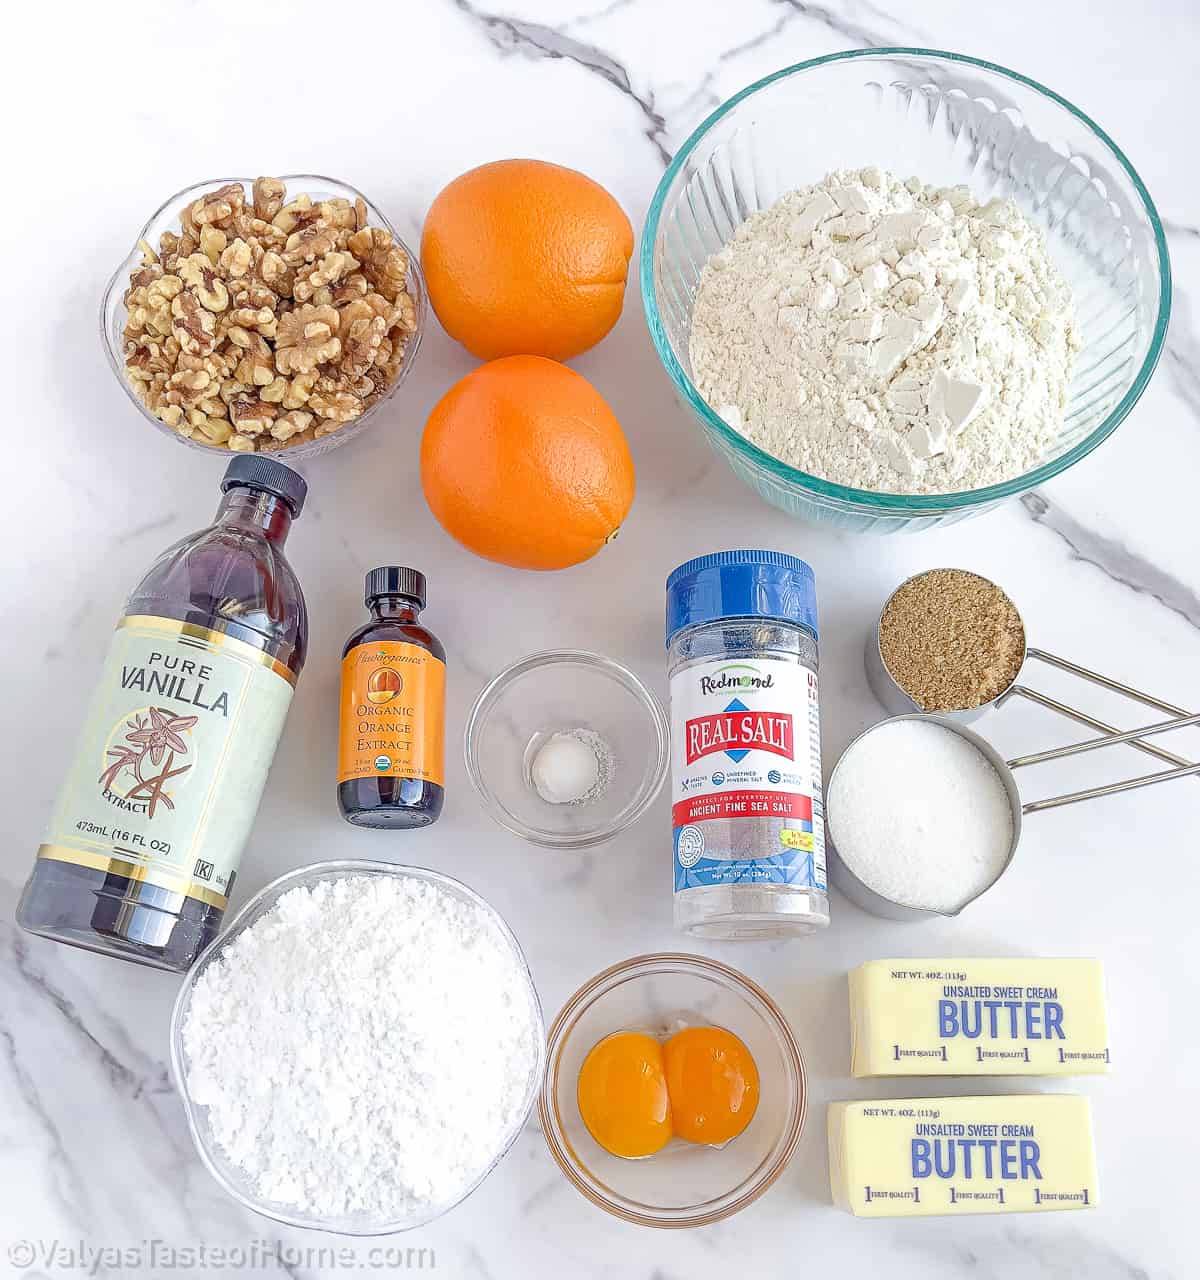 All you need are some simple pantry staple ingredients to make this cookie ball recipe at home.